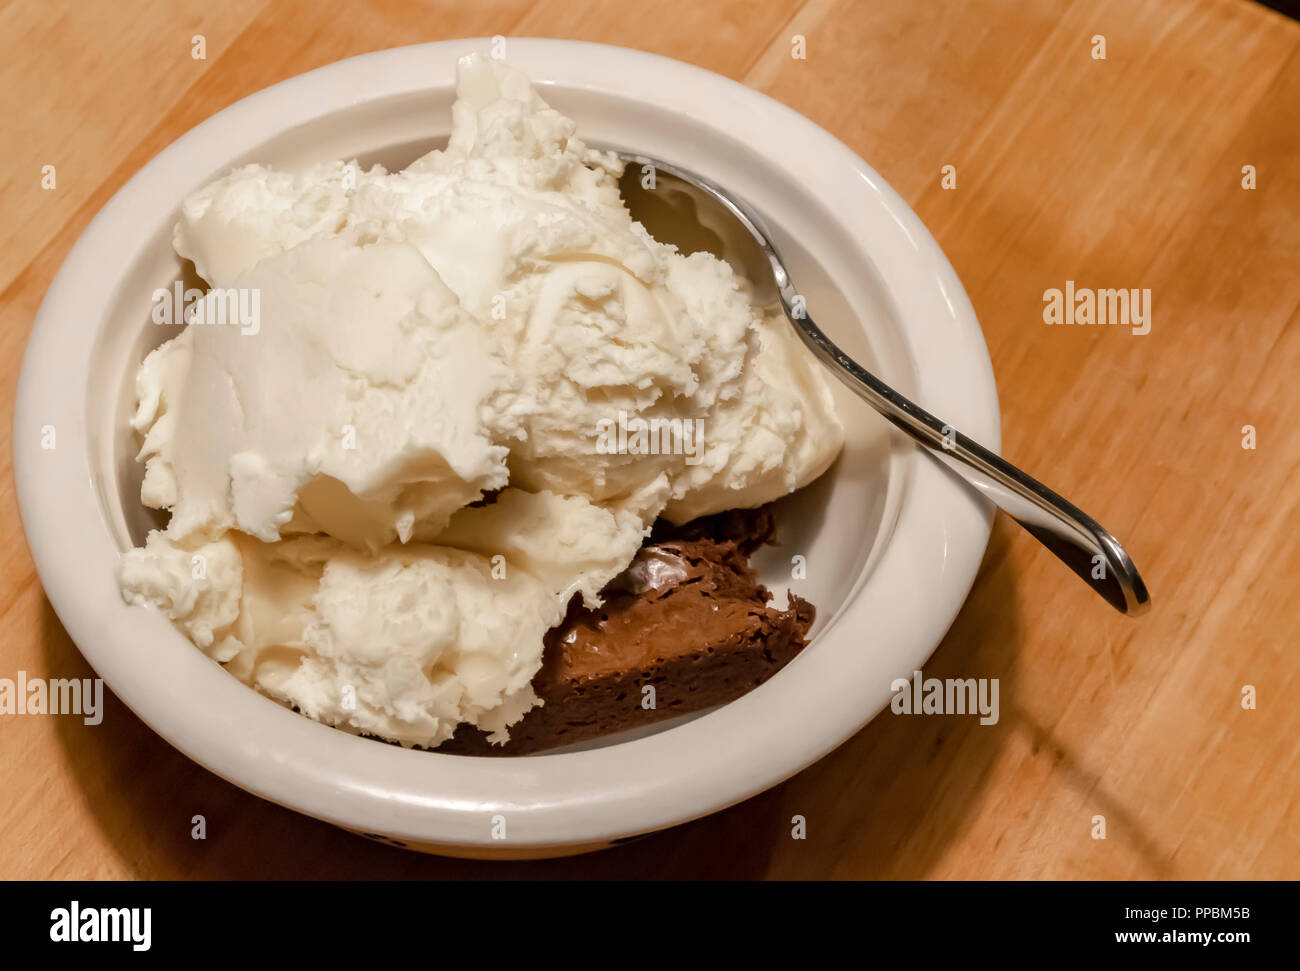 Ice cream and a spoon almost cover a brownie in a bowl on a wooden countertop. Stock Photo